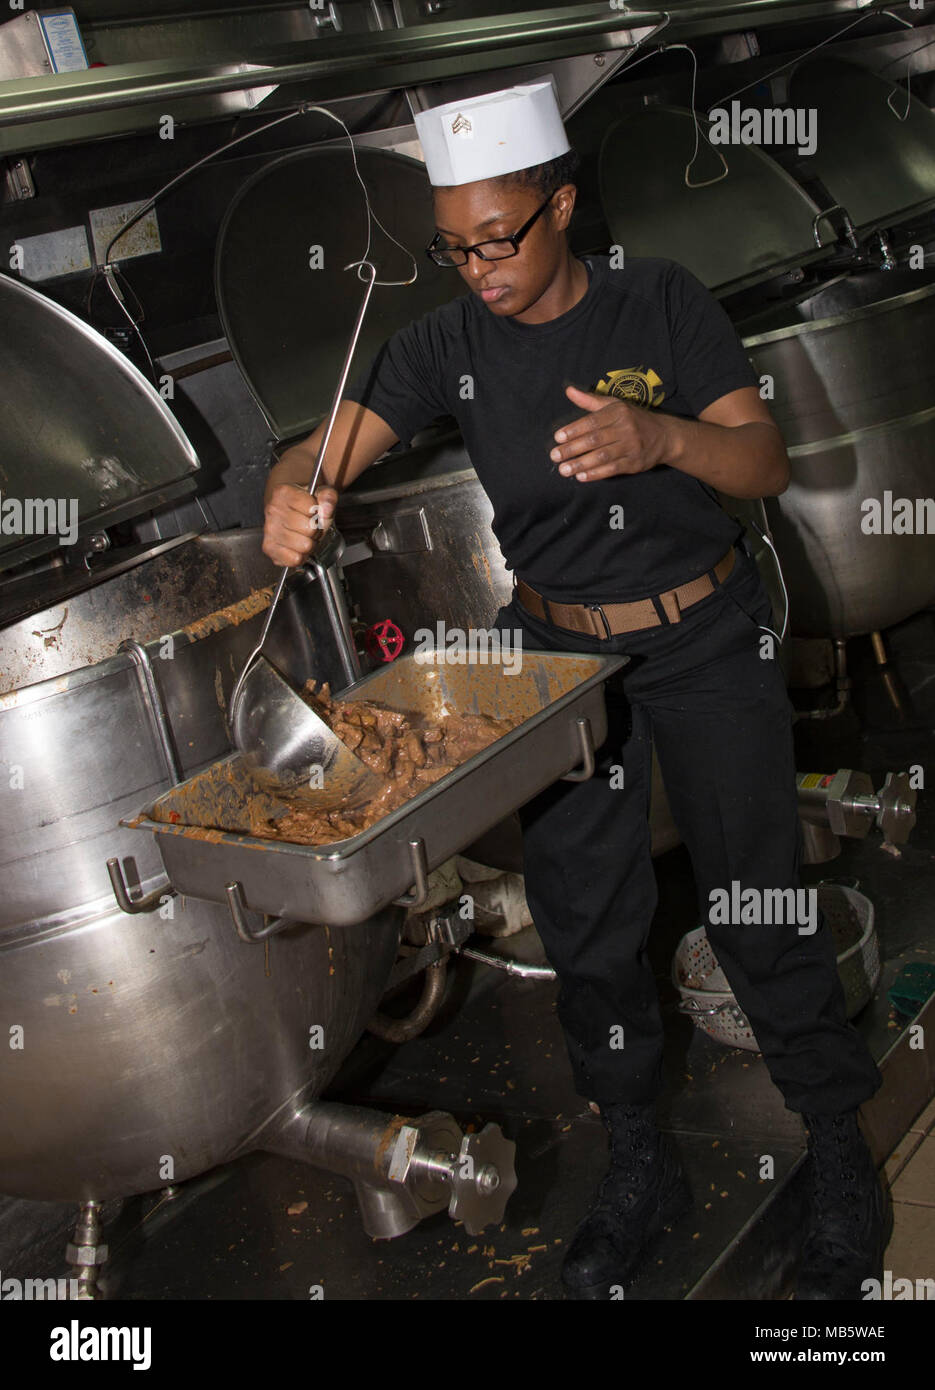 OCEAN (Feb. 22, 2018) Marine Sgt. Tandra Burns, from Flint, Michigan, ladles pepper steak into a serving pan in the galley of the Wasp-class amphibious assault ship USS Iwo Jima (LHD 7), Feb. 22, 2018. Iwo Jima, homeported in Mayport, Florida, is conducting naval operations in the U.S. 6th Fleet area of operations. Stock Photo